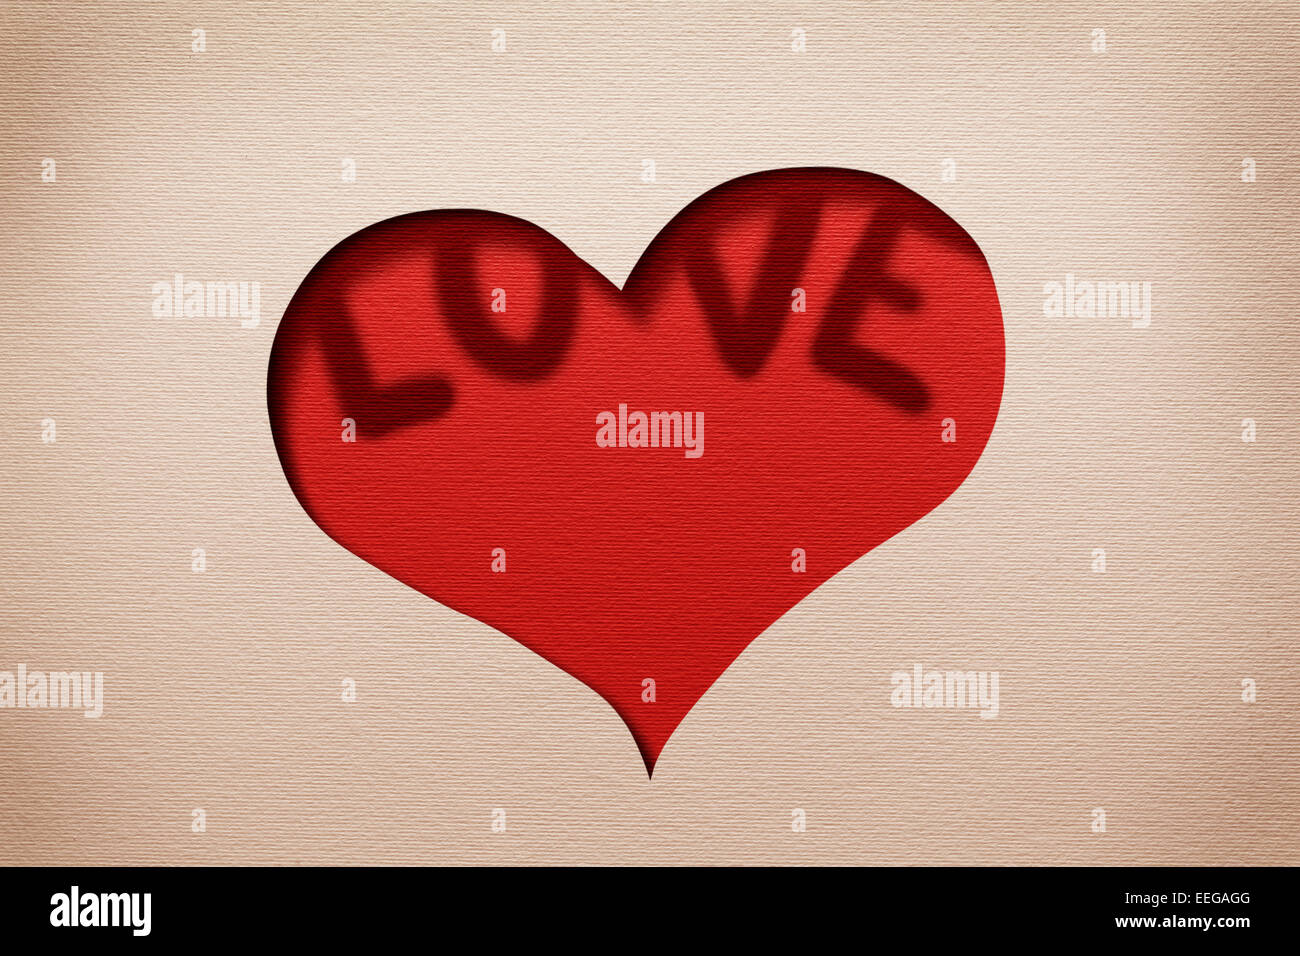 Heart cutout in paper with word 'LOVE' inside.Card design. Stock Photo